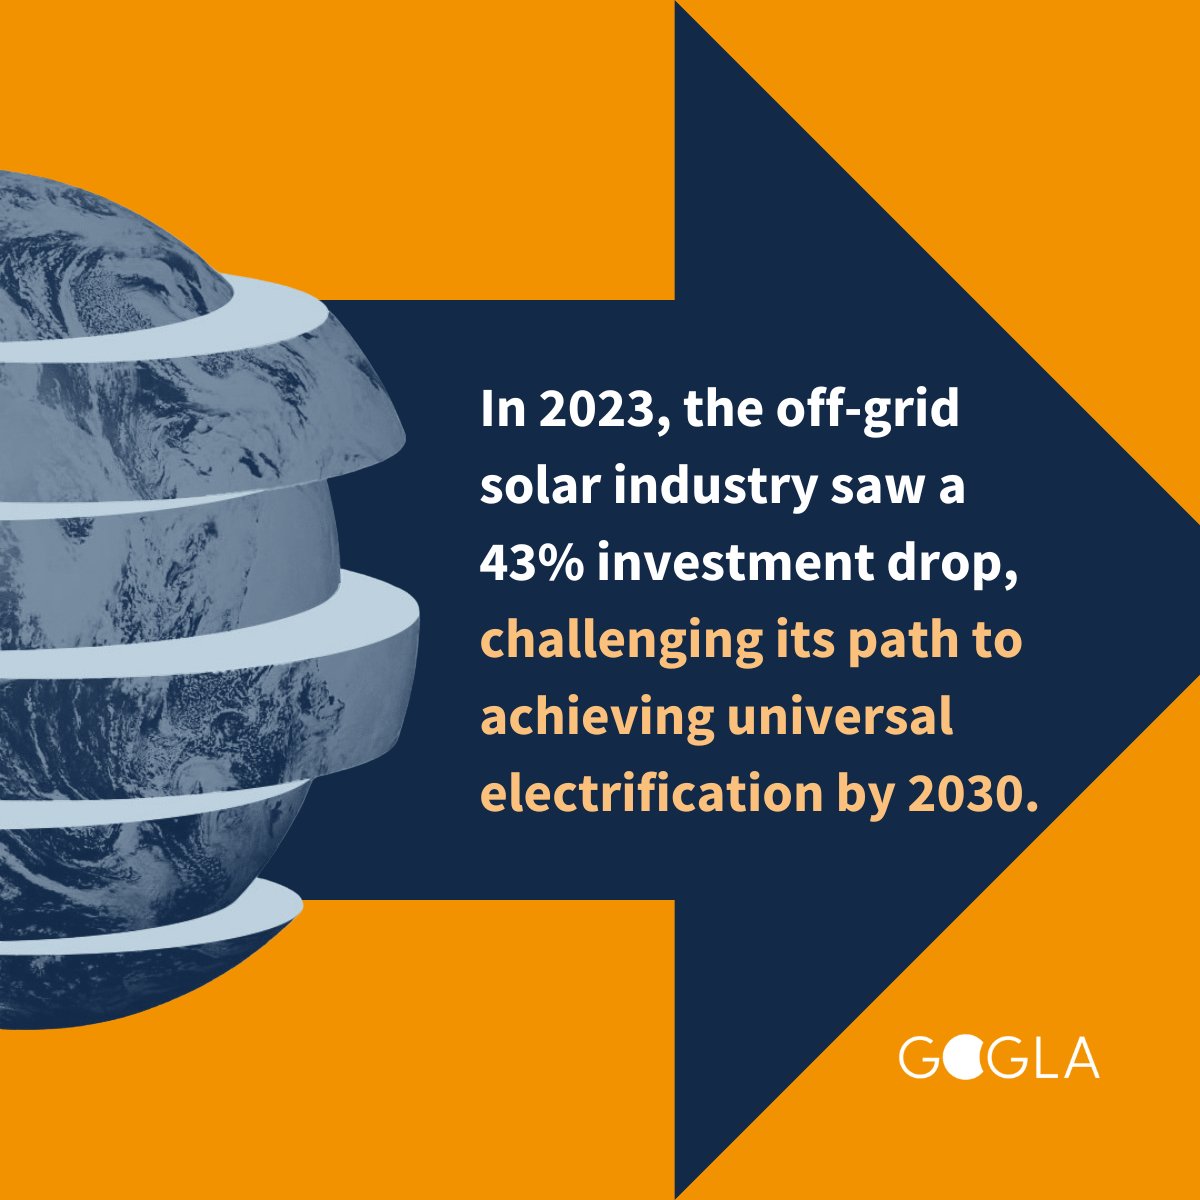 #OffGridSolar investment fell to $425 mn in 2023! 💰To meet #SDG7 goals the sector needs $3 bn annually - meaning we're seeing a $2.5 bn investment gap. 🚀How do we fill the gap? More de-risking instruments & concessional financing. @GOGLAssociation gogla.org/challenging-co…